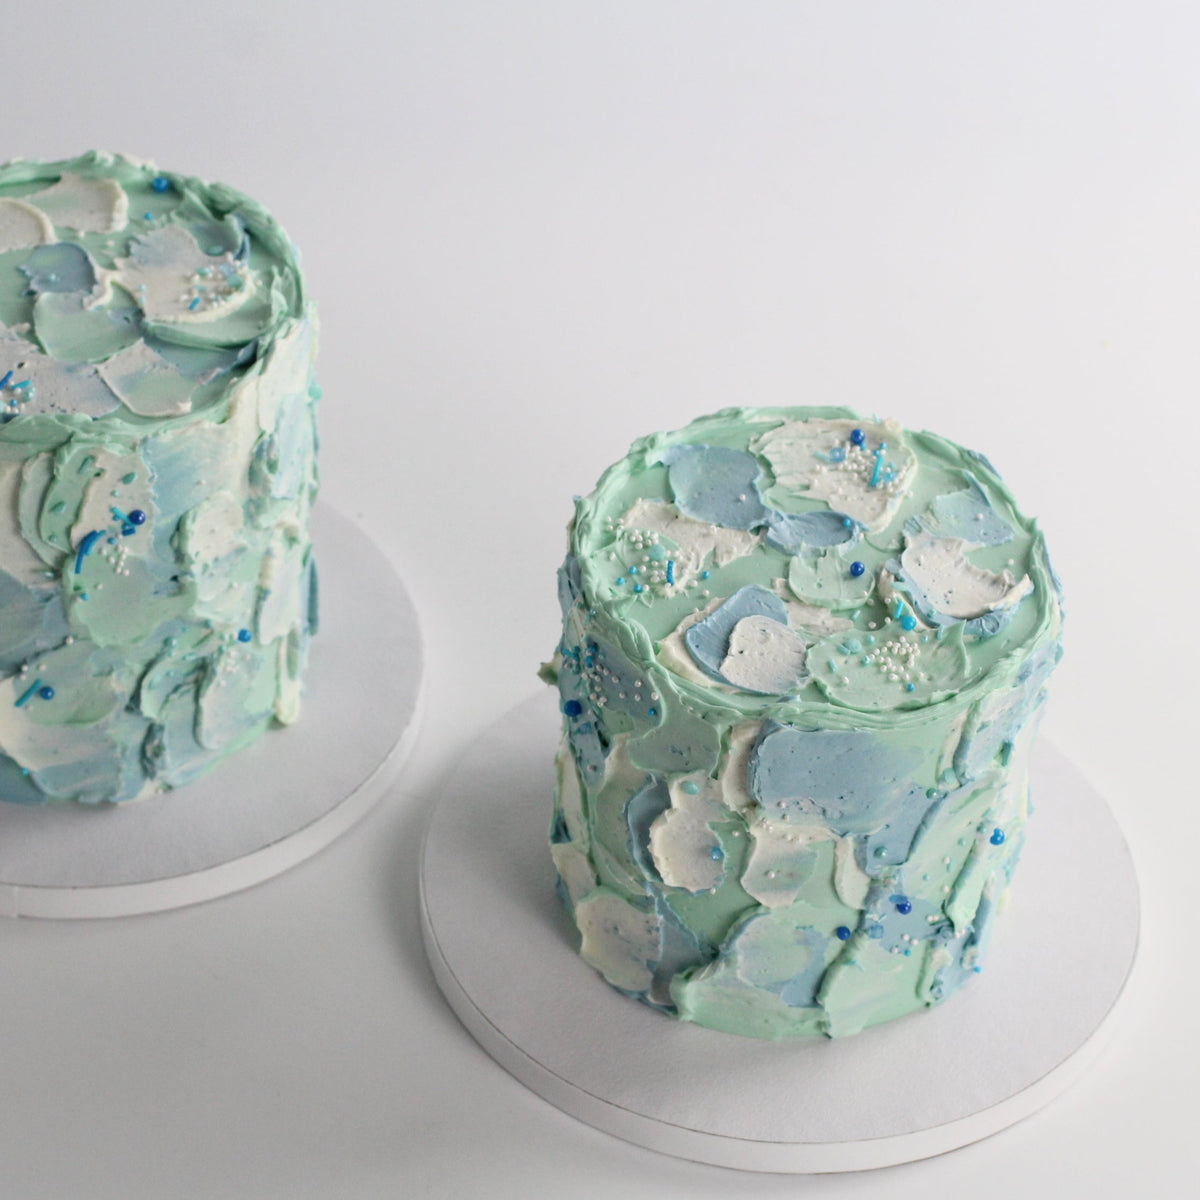 Our signature Cloud Cake with blue &amp; mint fluffy icing and a dash of sprinkles.